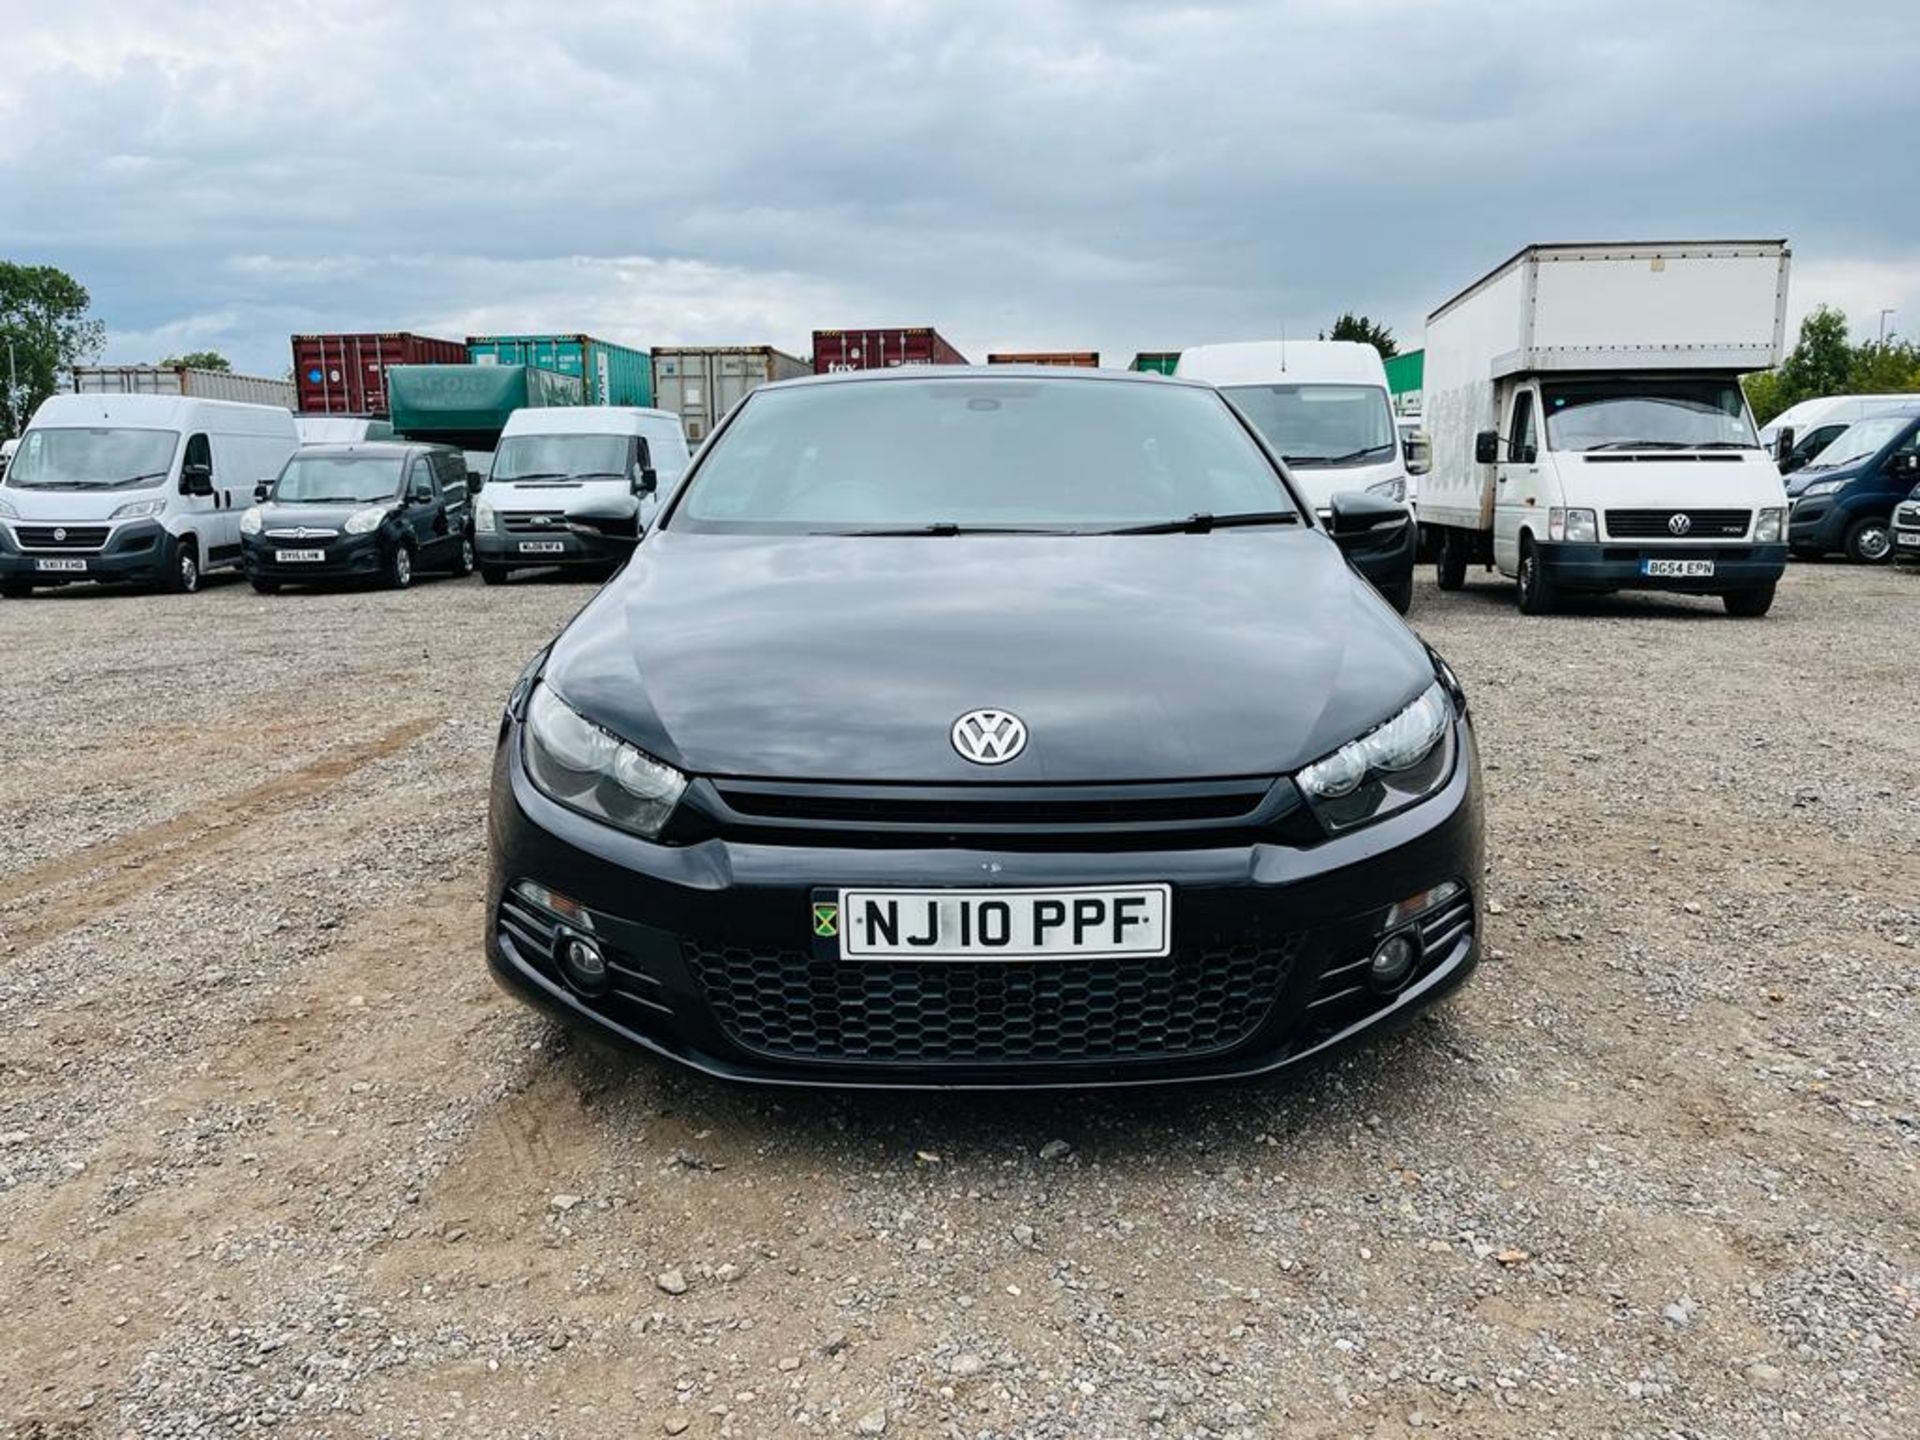 ** ON SALE ** Volkswagen Scirocco GT 2.0 TSI 210 Coupe 2010 '10 Reg' Sat Nav - A/C - Only 78719 - Image 2 of 25